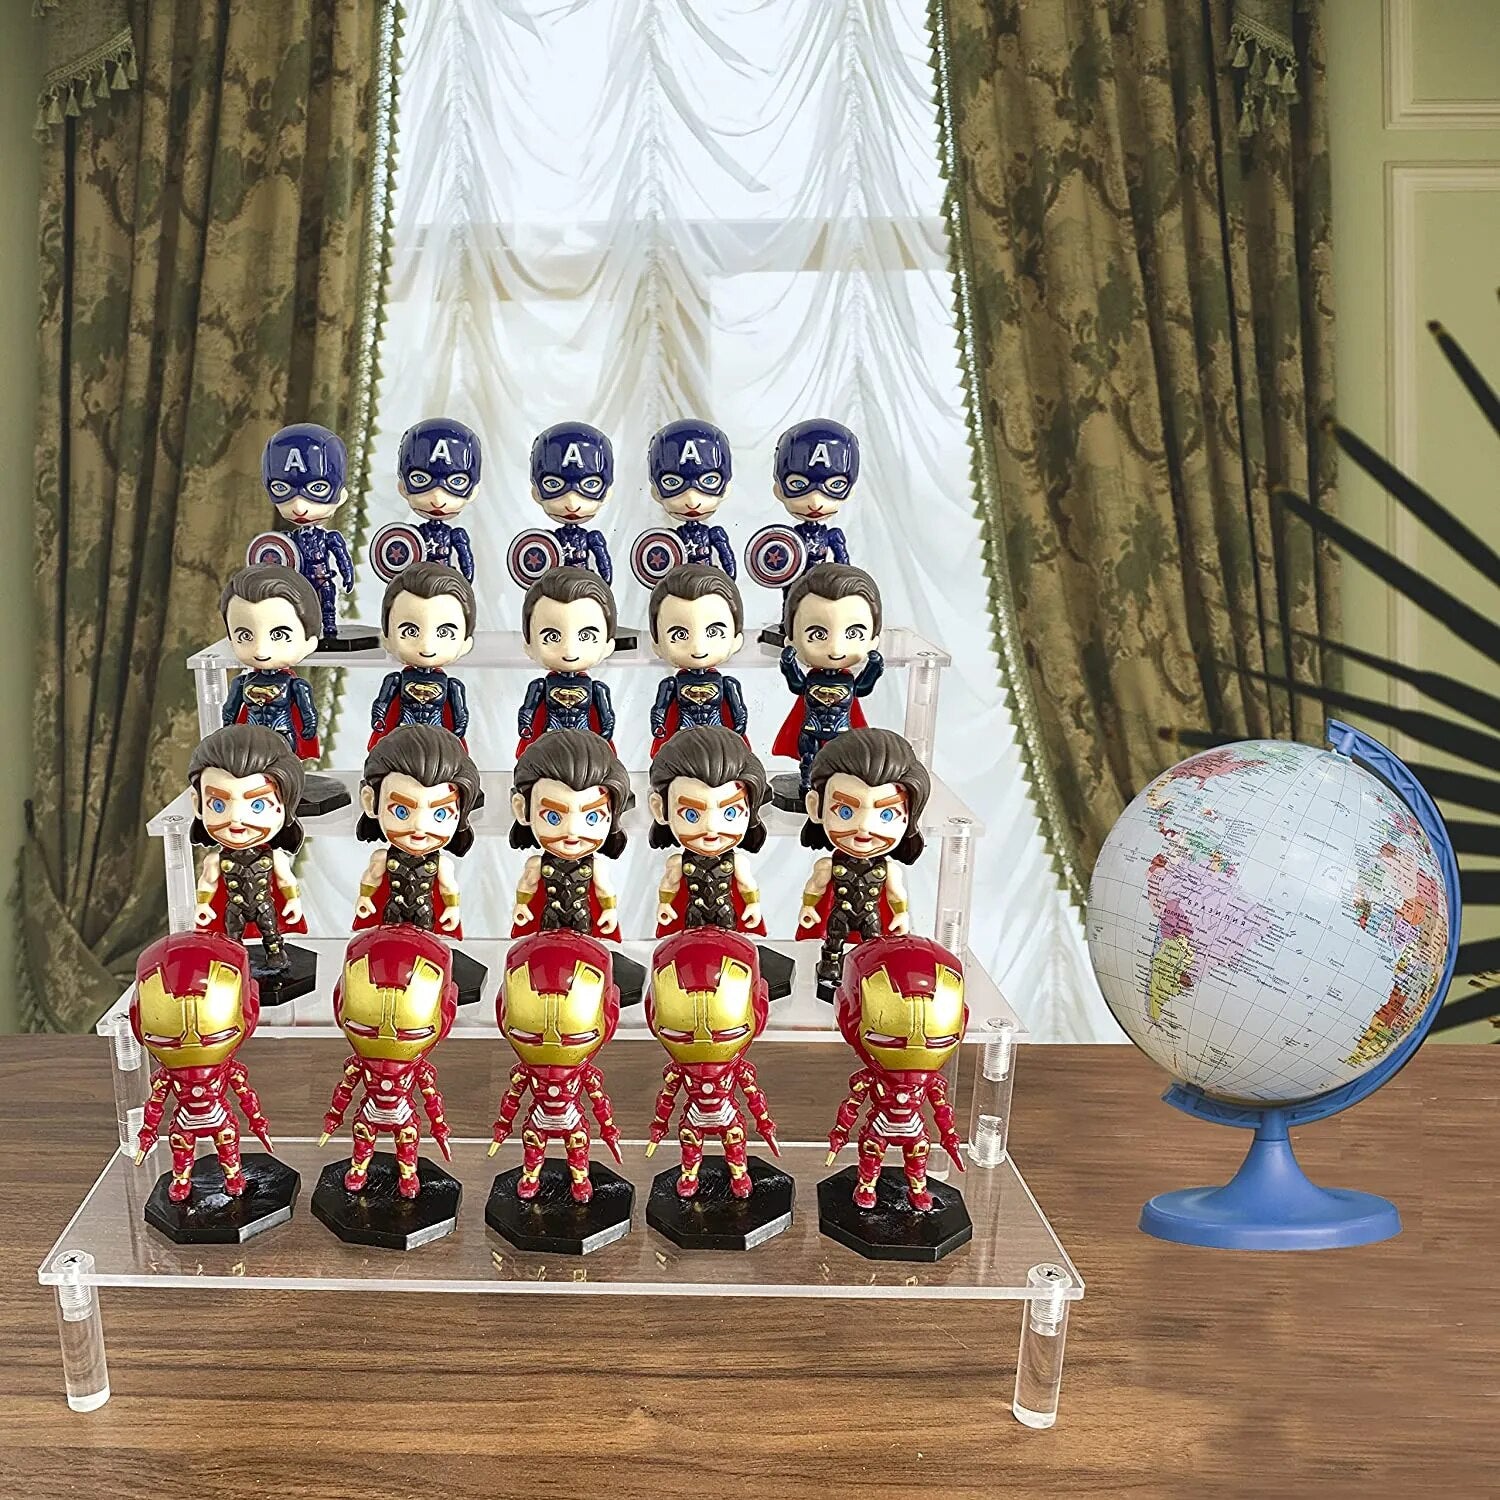 A doll display stand with the clear acrylic display stand